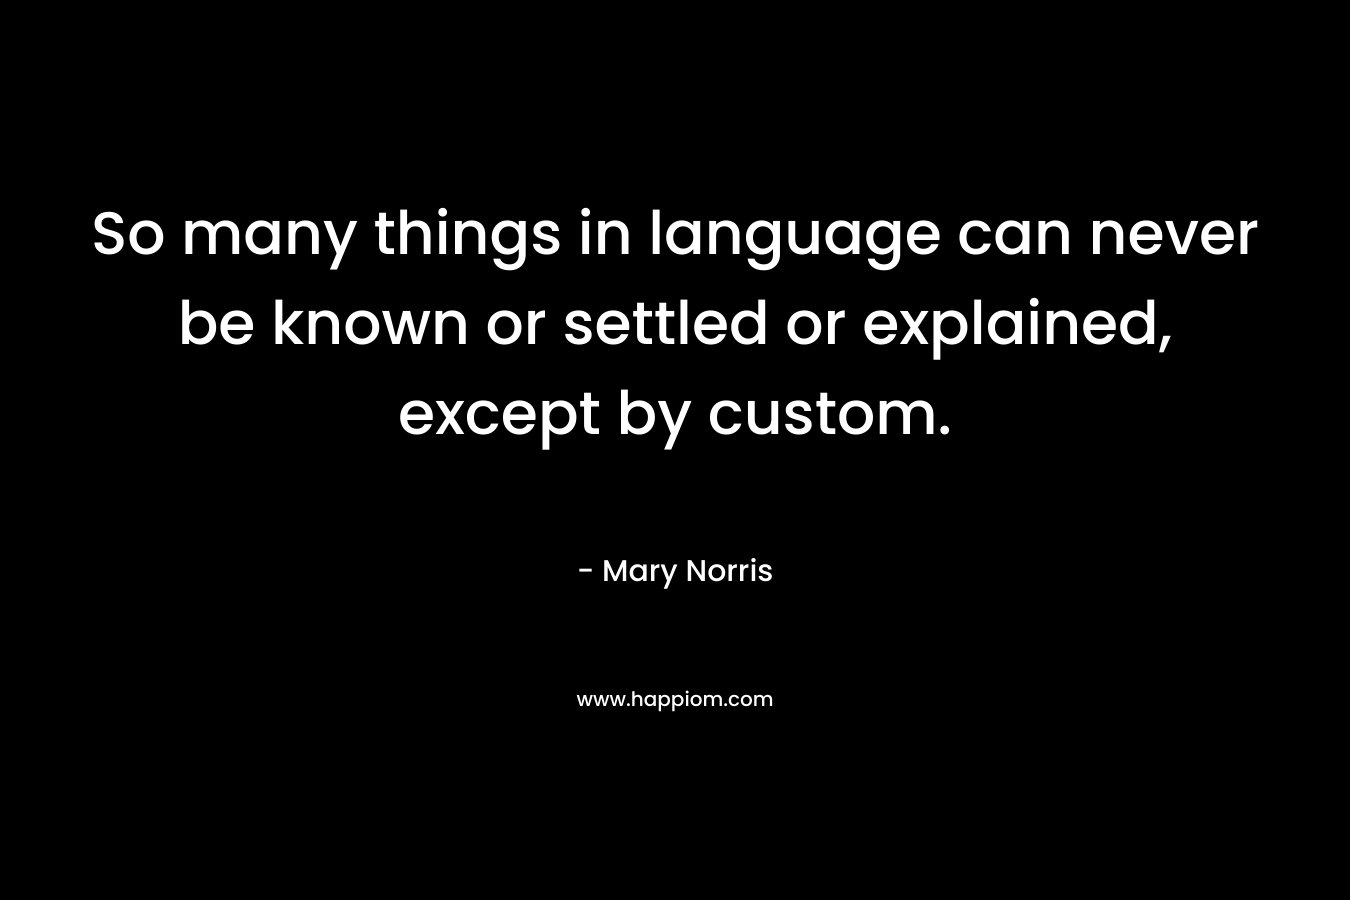 So many things in language can never be known or settled or explained, except by custom.